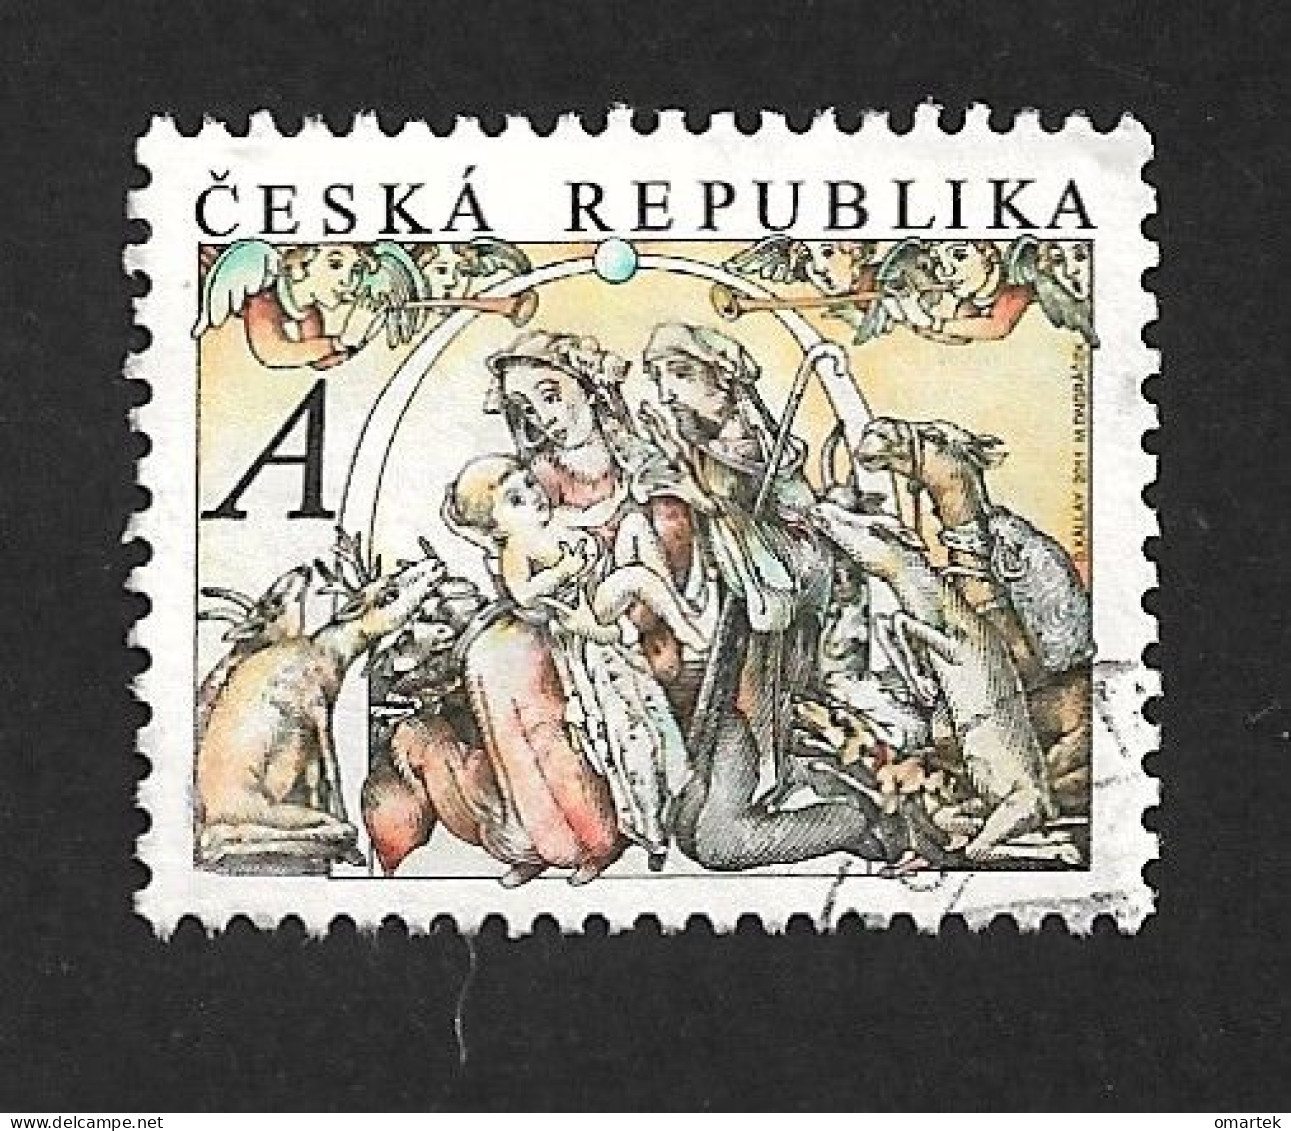 Czech Republic 2011 ⊙ Mi 706 Sc 3521 Christmas, Holy Family. Tschechische Republik C.3 - Used Stamps